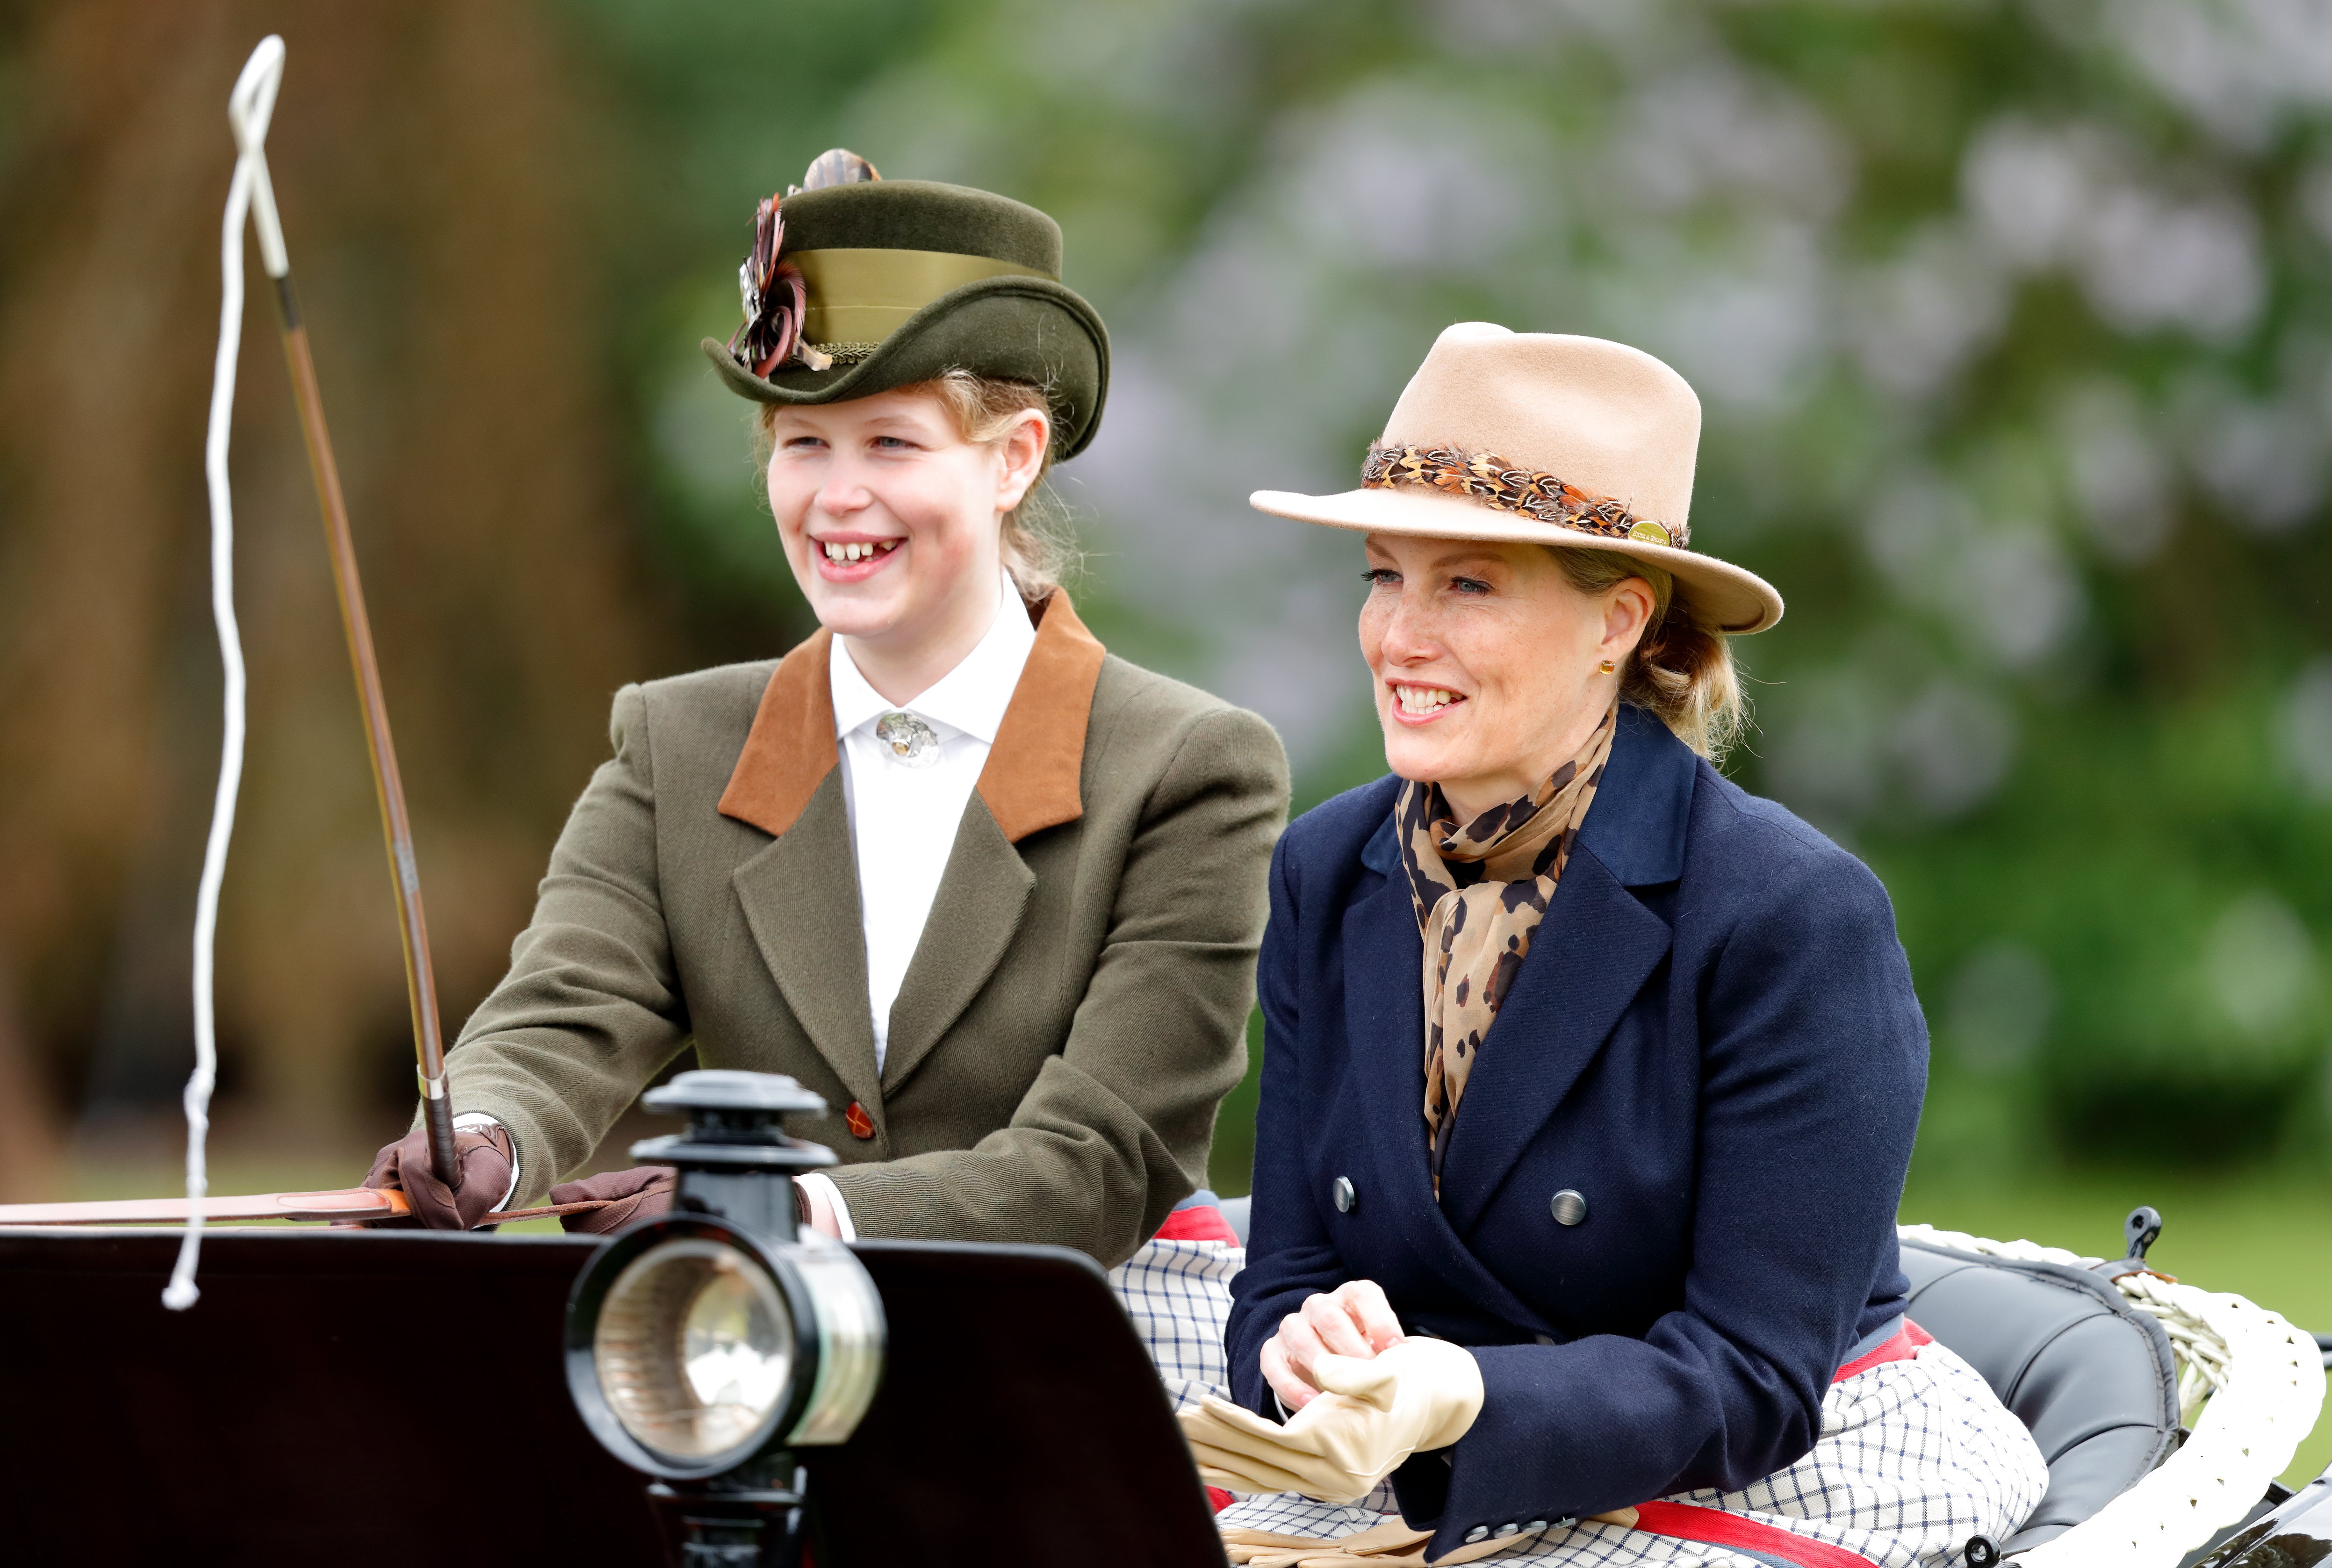  Lady Louise Windsor and Sophie, Countess of Wessex, carriage driving on day 5 of the Royal Windsor Horse Show in Home Park on May 13, 2018, in Windsor, England | Source: Getty Images